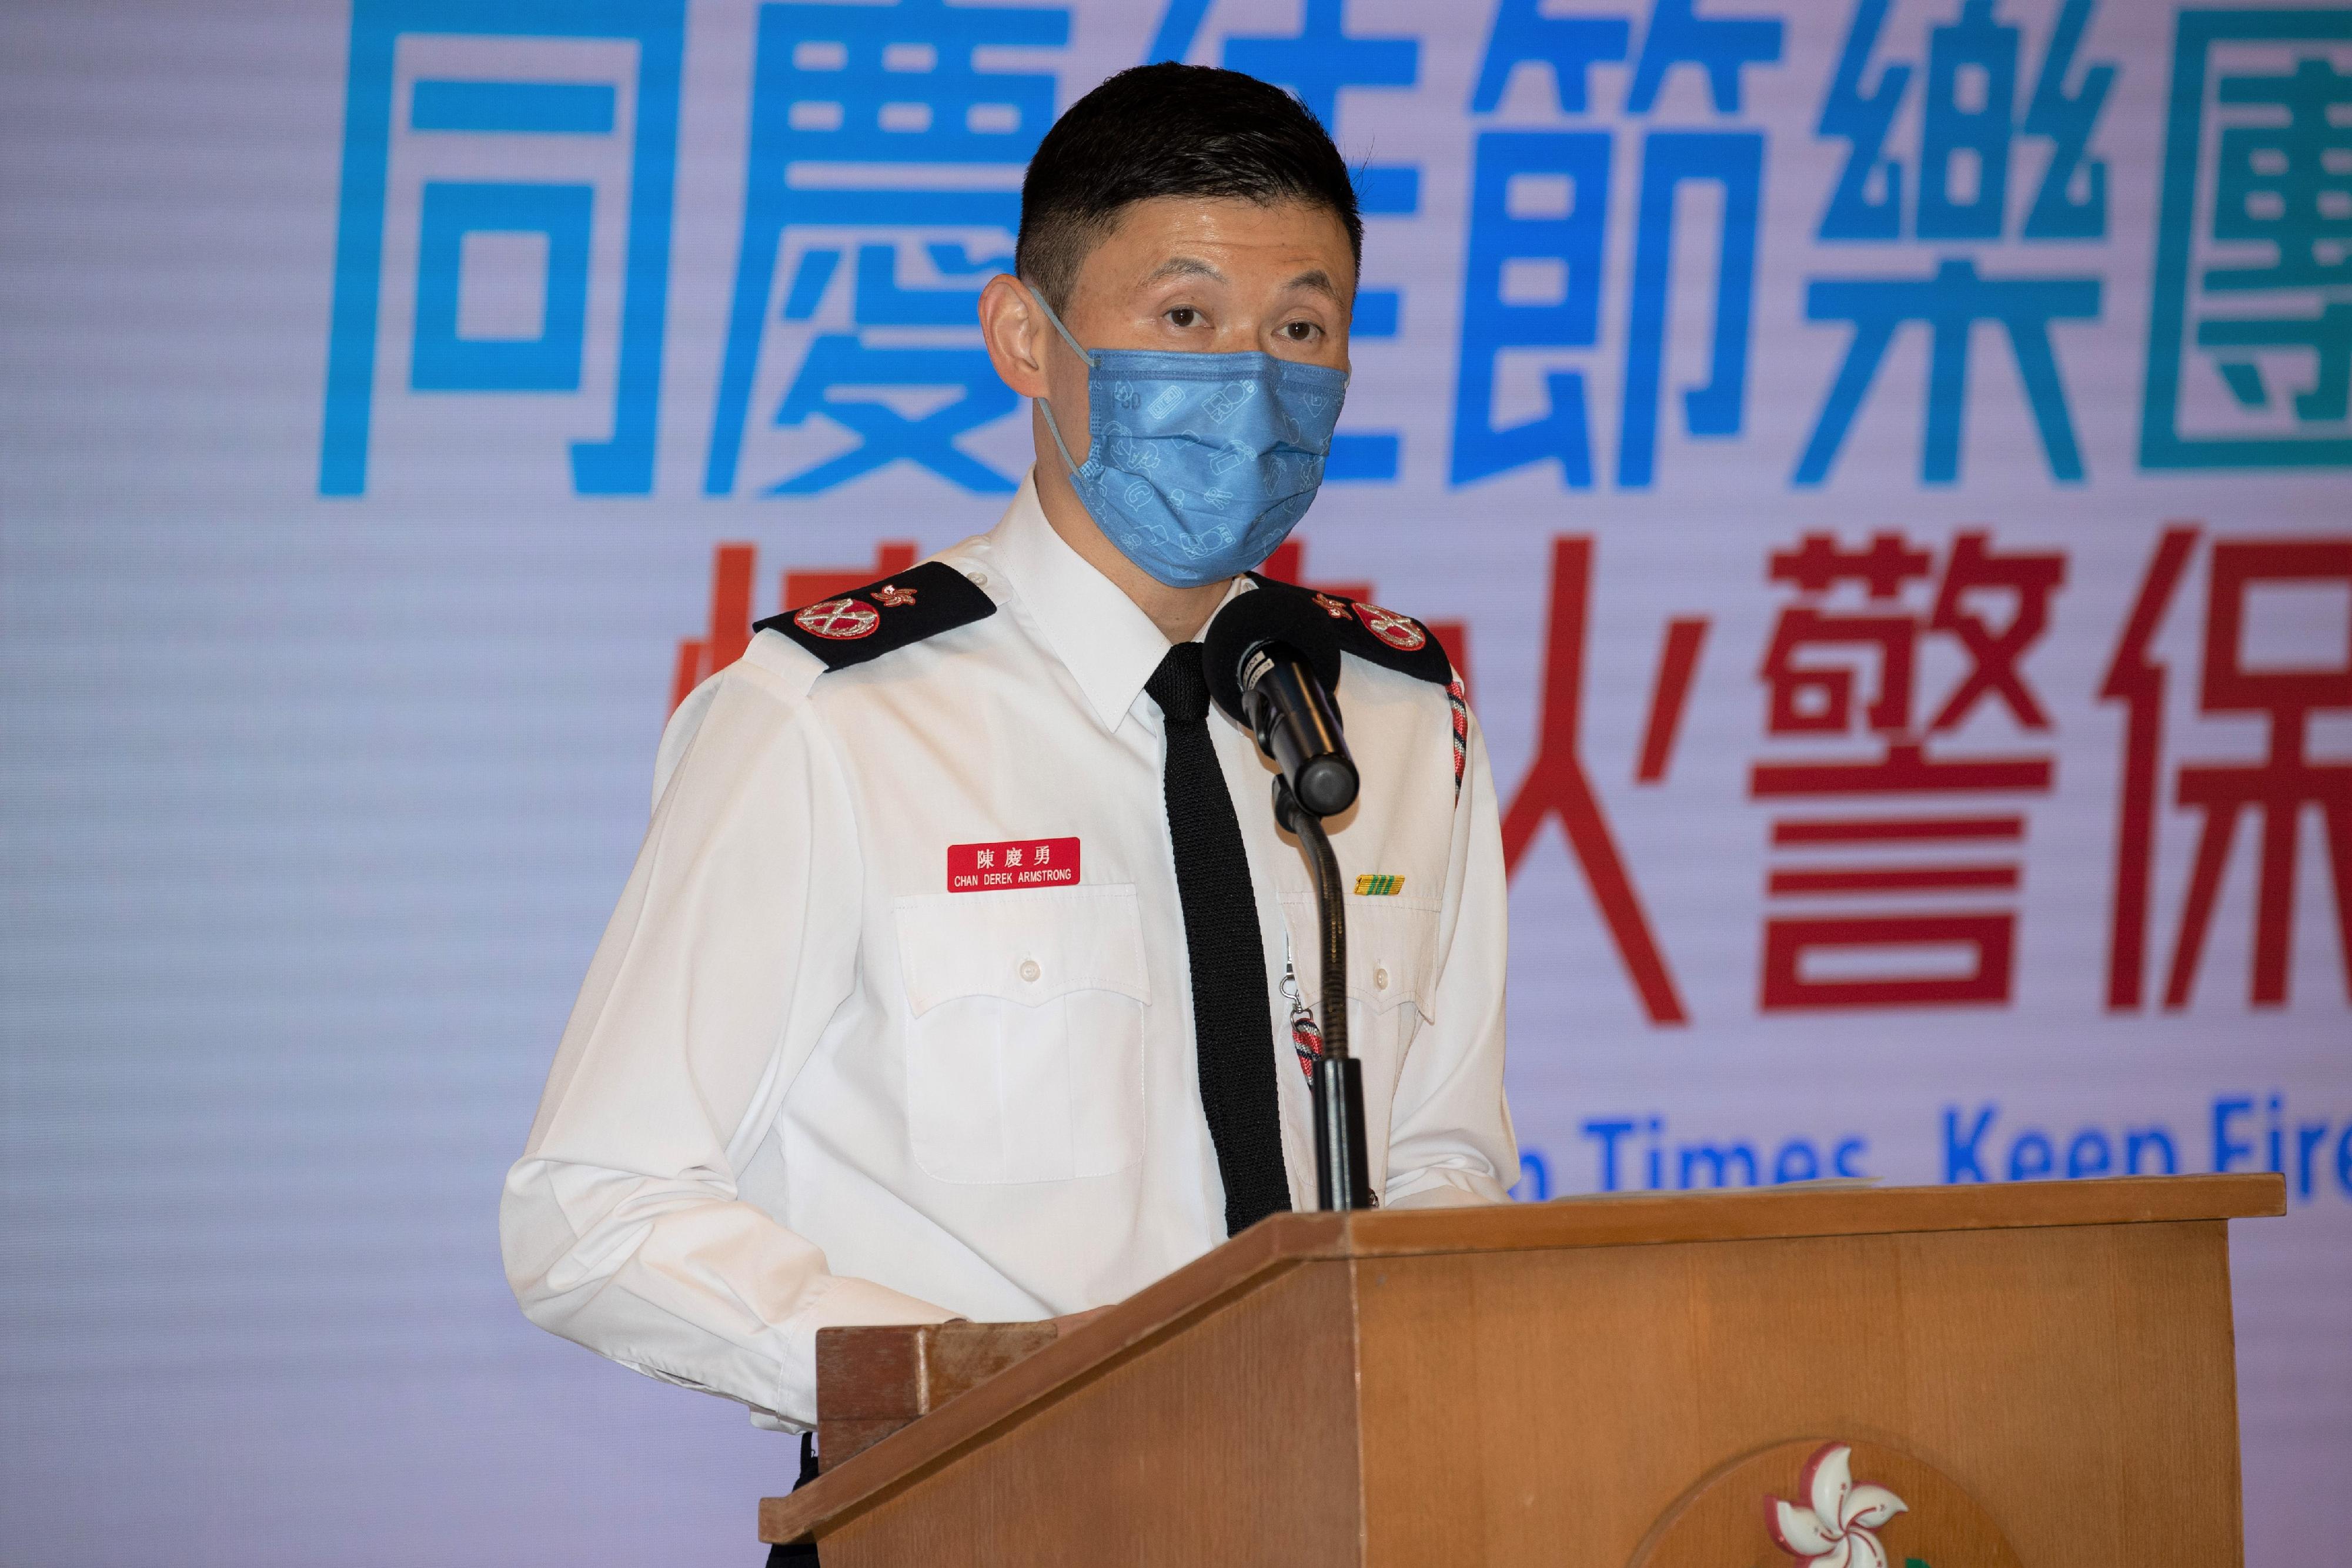 The Fire Services Department today (November 30) held a launching ceremony of the Fire Safety Activities during Festive Season Campaign 2022 at Tsim Sha Tsui Fire Station. Photo shows the Deputy Director of Fire Services (Public Safety and Corporate Strategy), Mr Derek Armstrong Chan, delivering a speech at the ceremony.